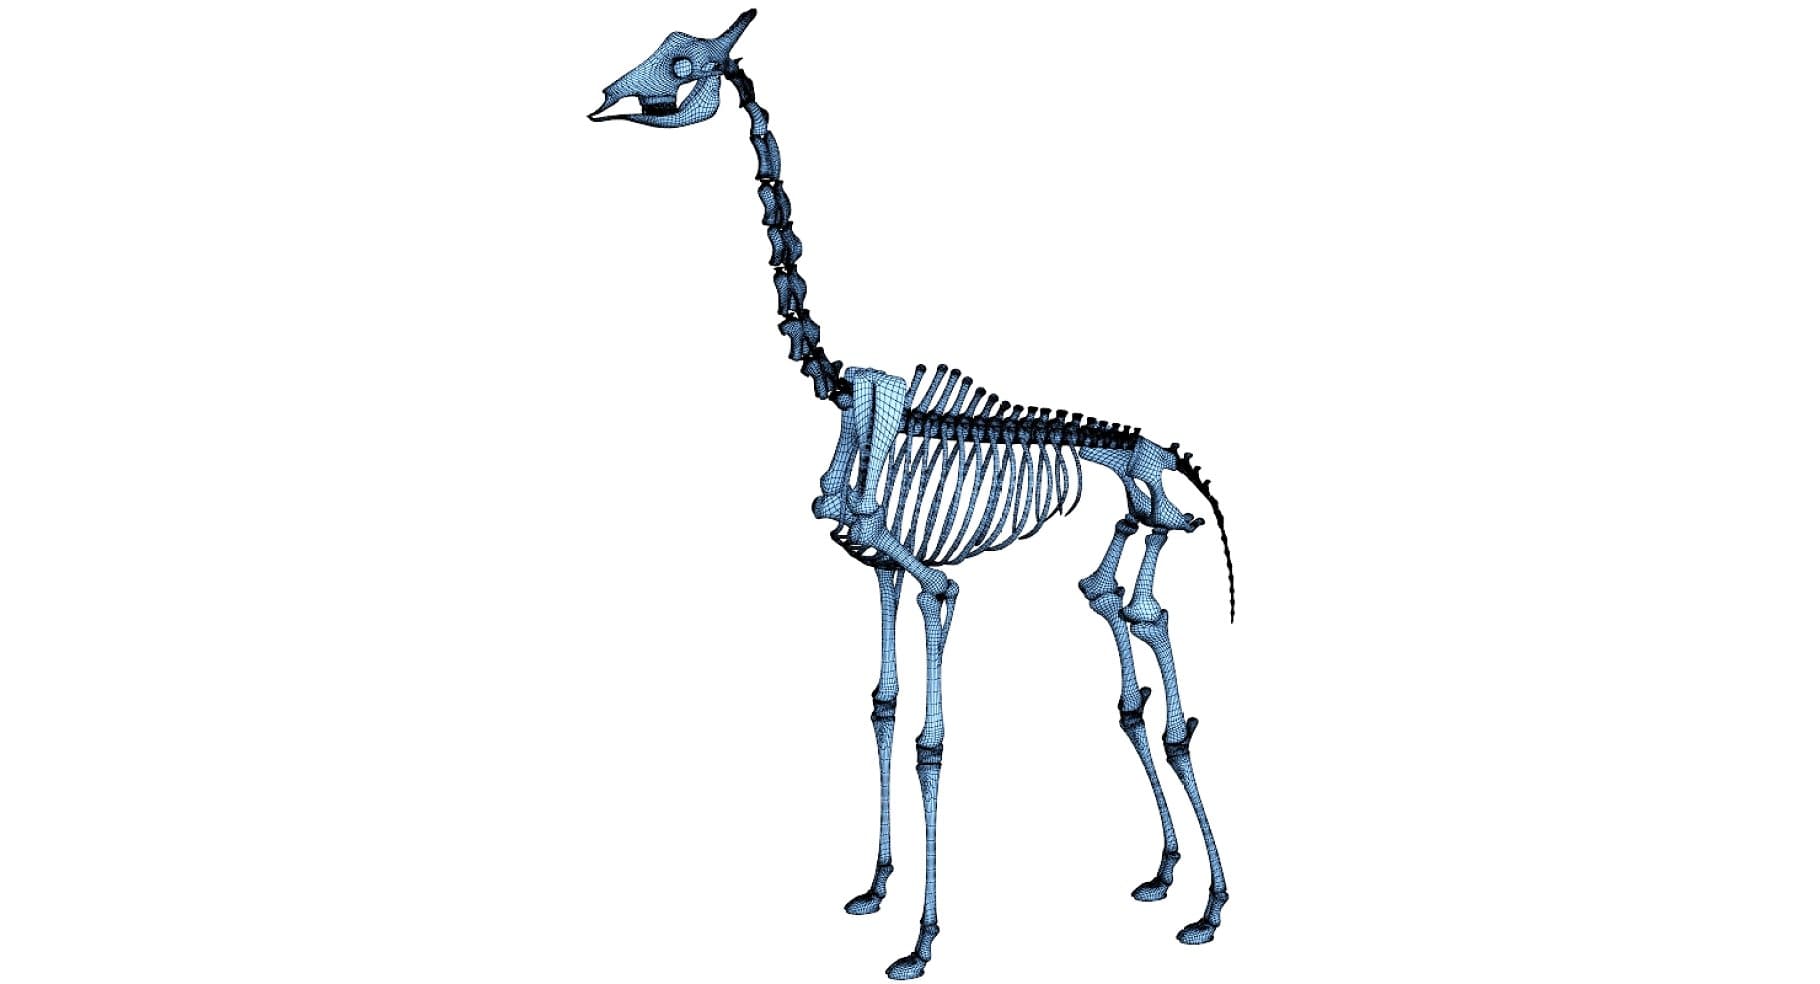 Image of a giraffe's black spine and blue ribs.